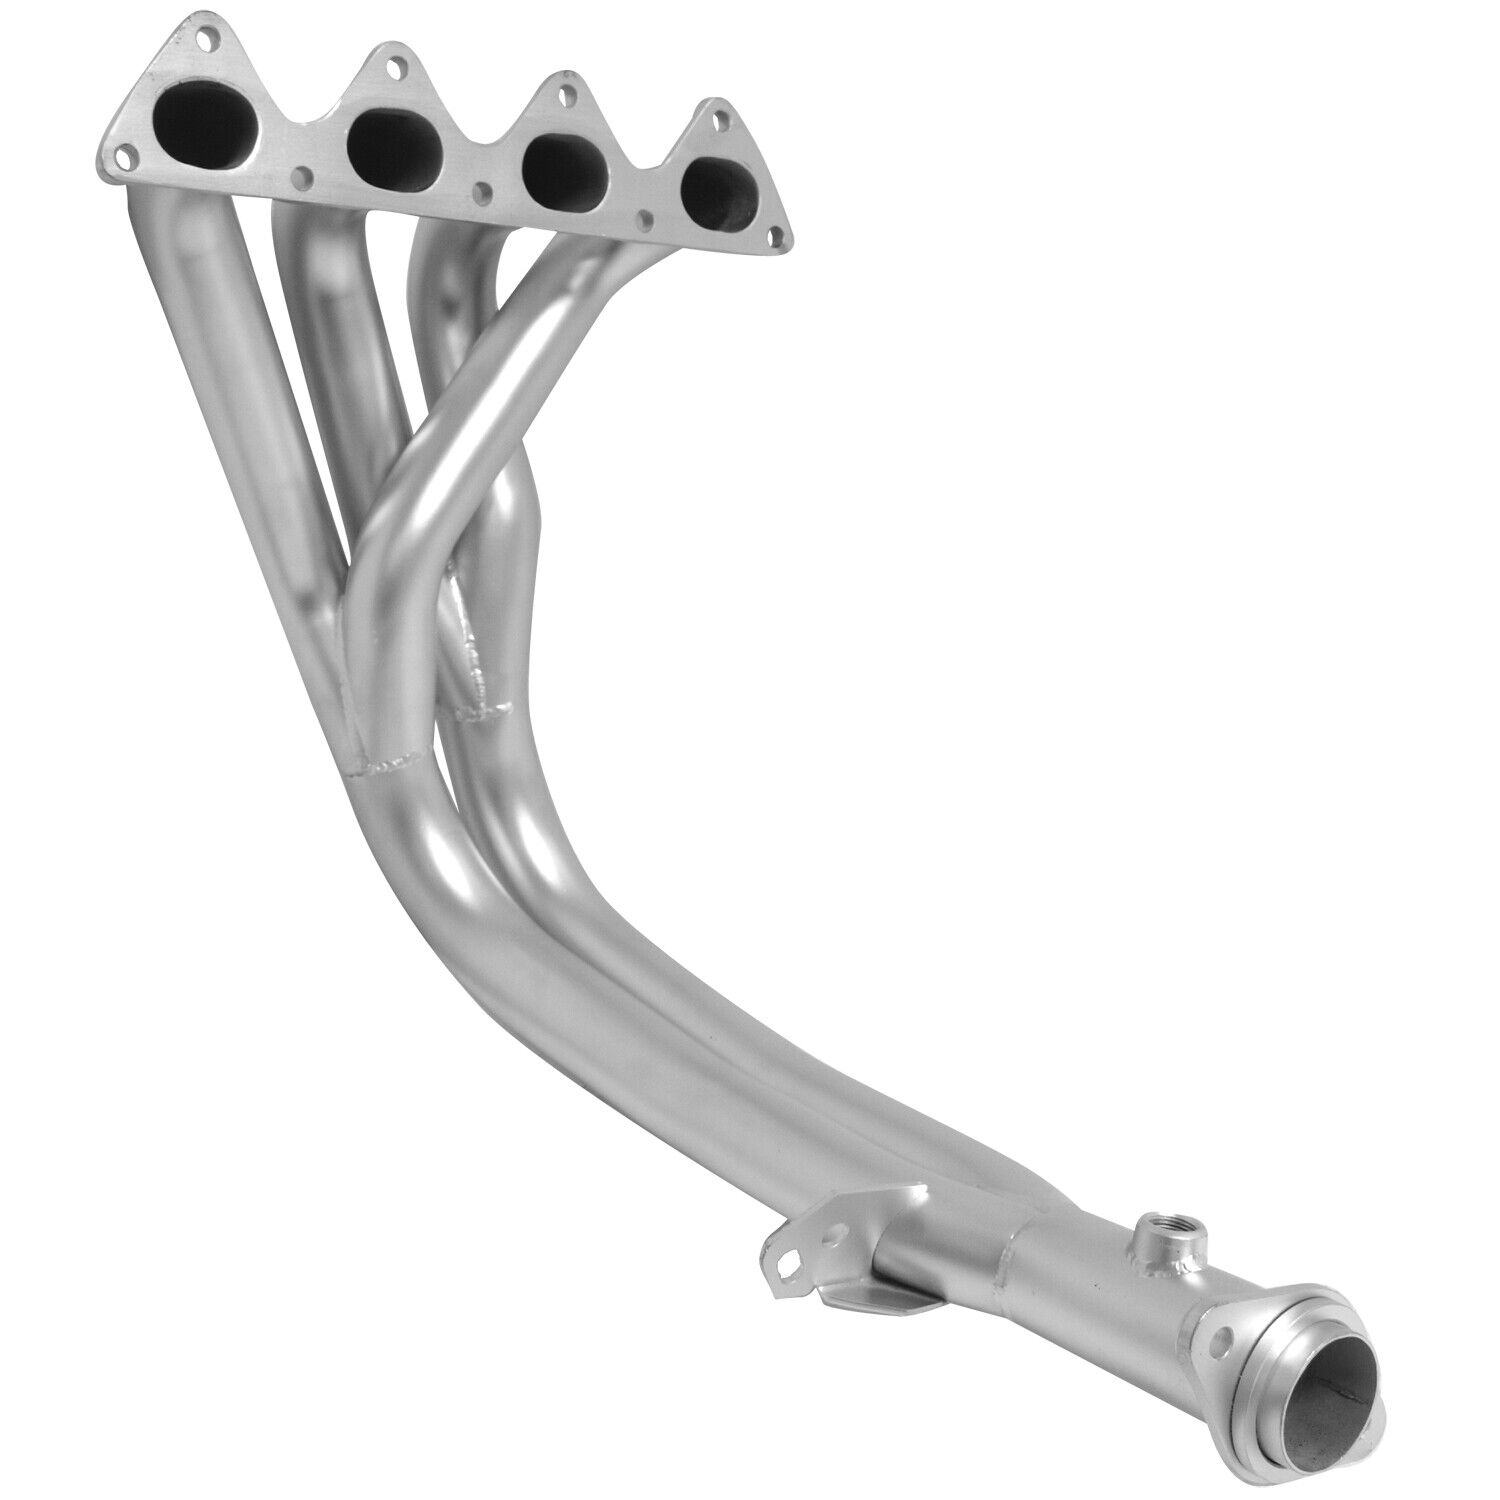 DC Sports Ceramic 4-2-1 Exhaust Header for 92-95 Civic 1.6 96-00 EX (Carb Legal)